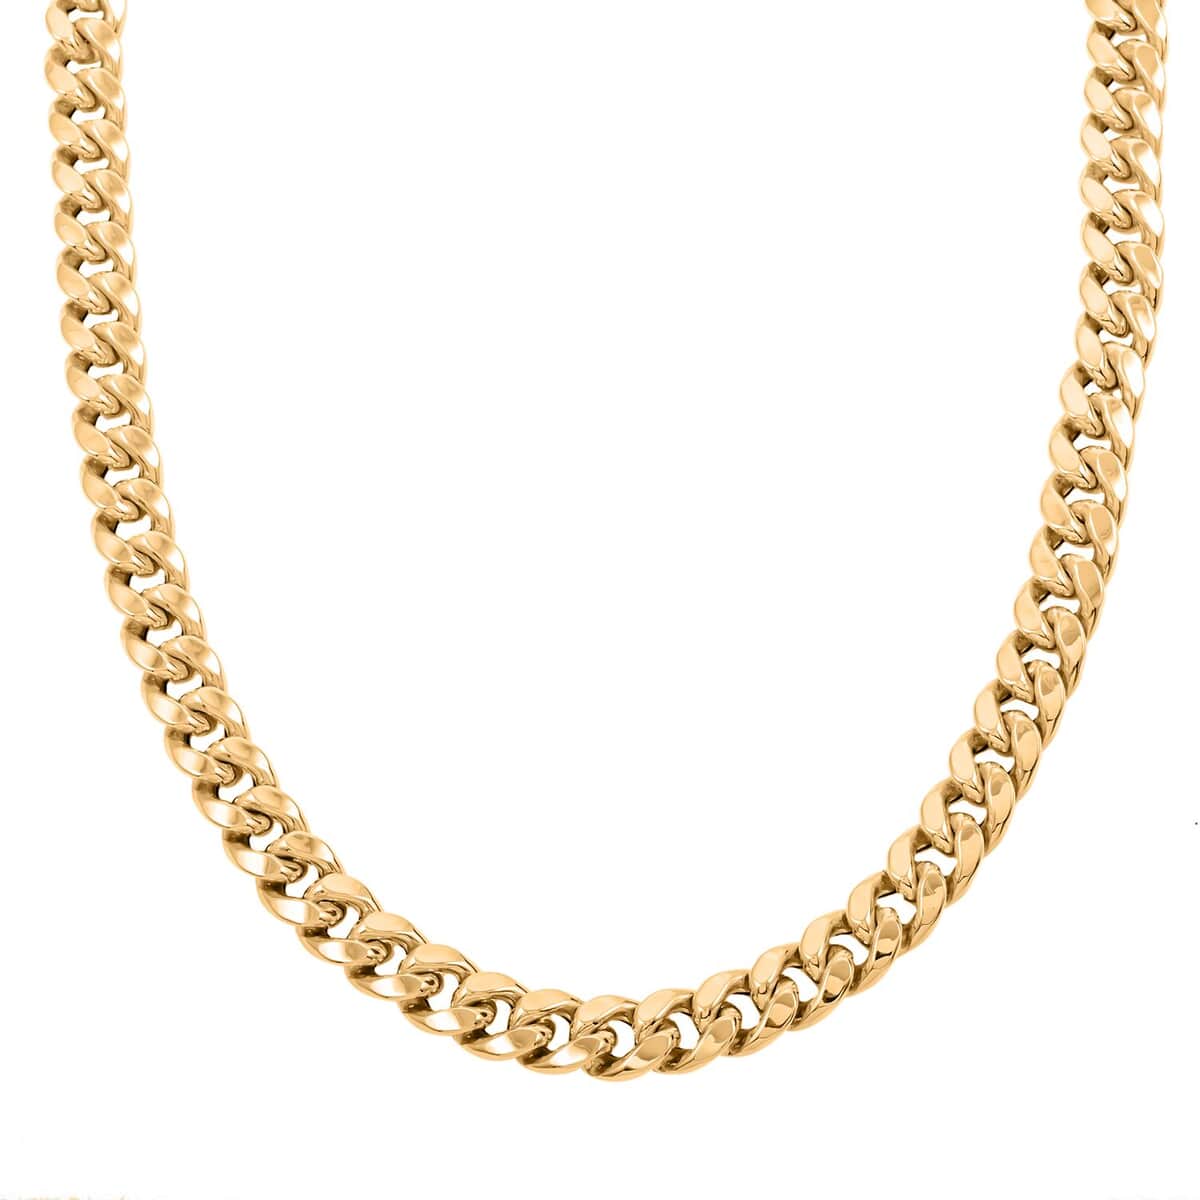 Buy 10K Yellow Gold 10.5mm Miami Cuban Chain Necklace 20 Inches 51 ...